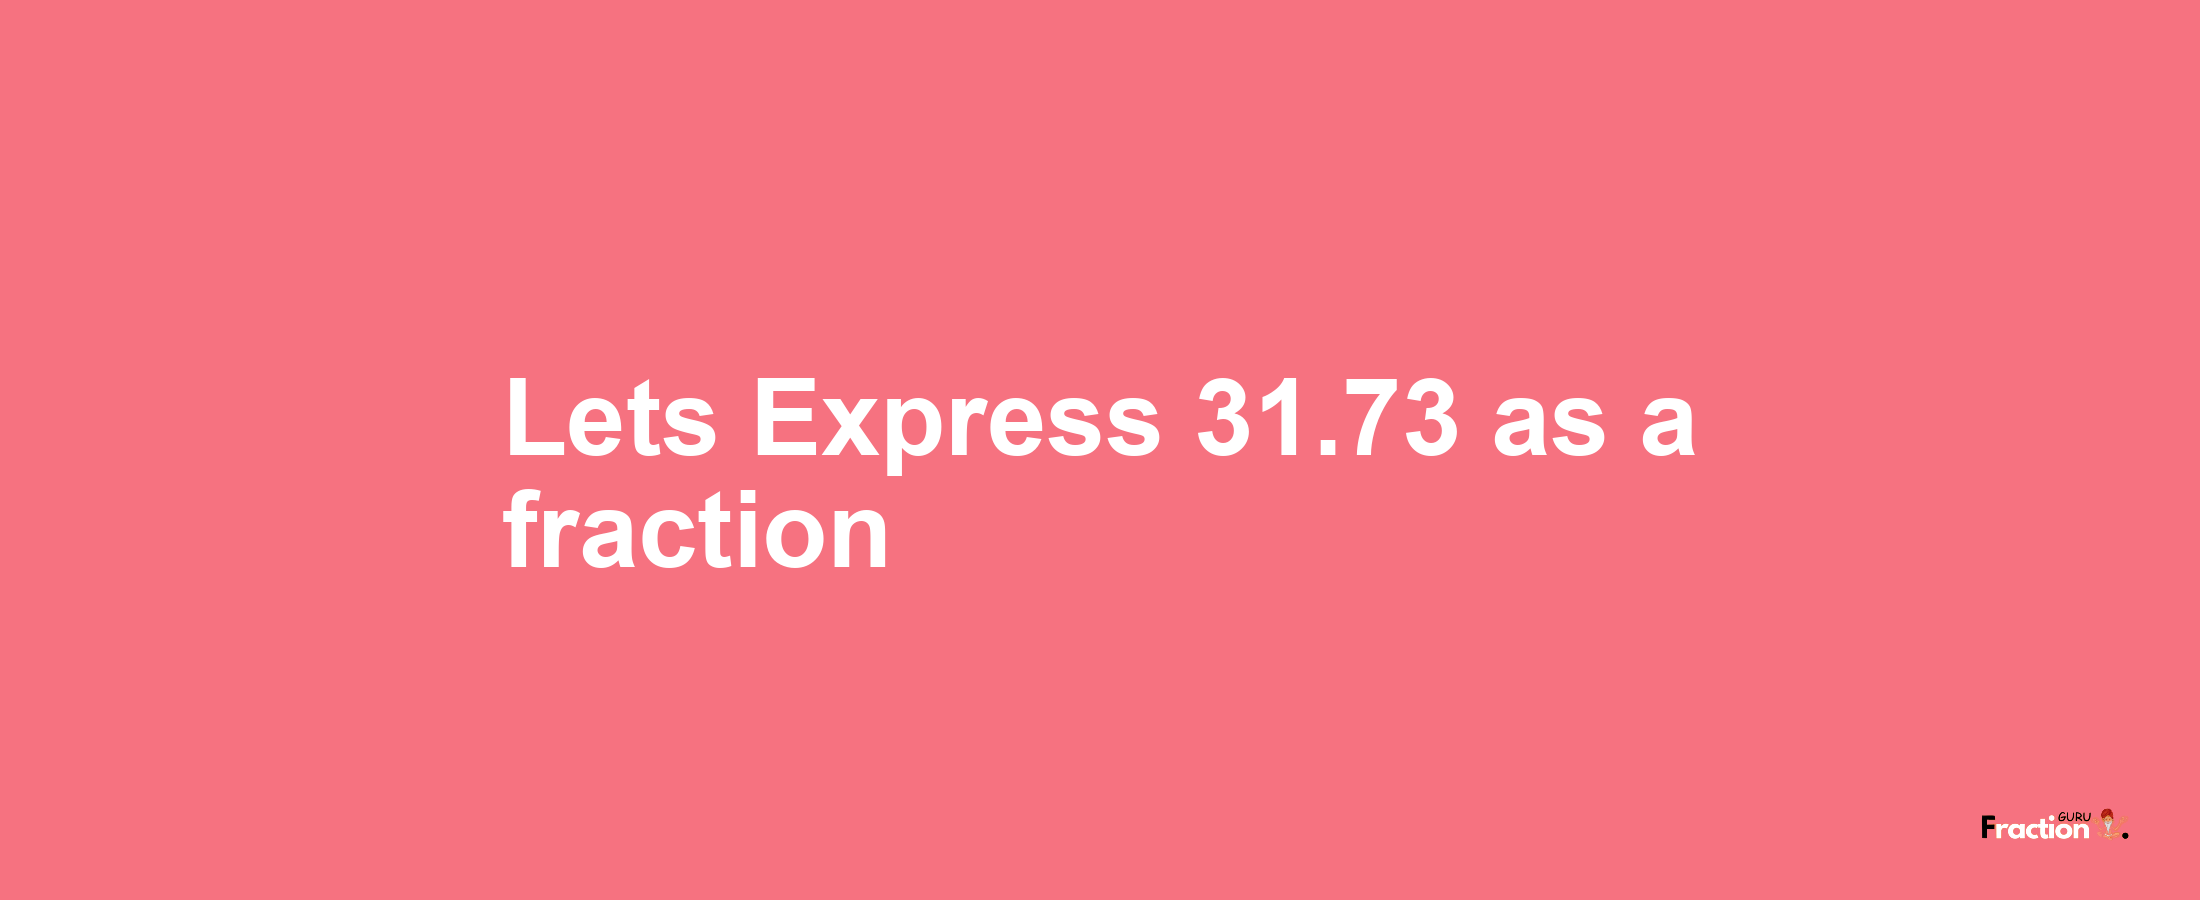 Lets Express 31.73 as afraction